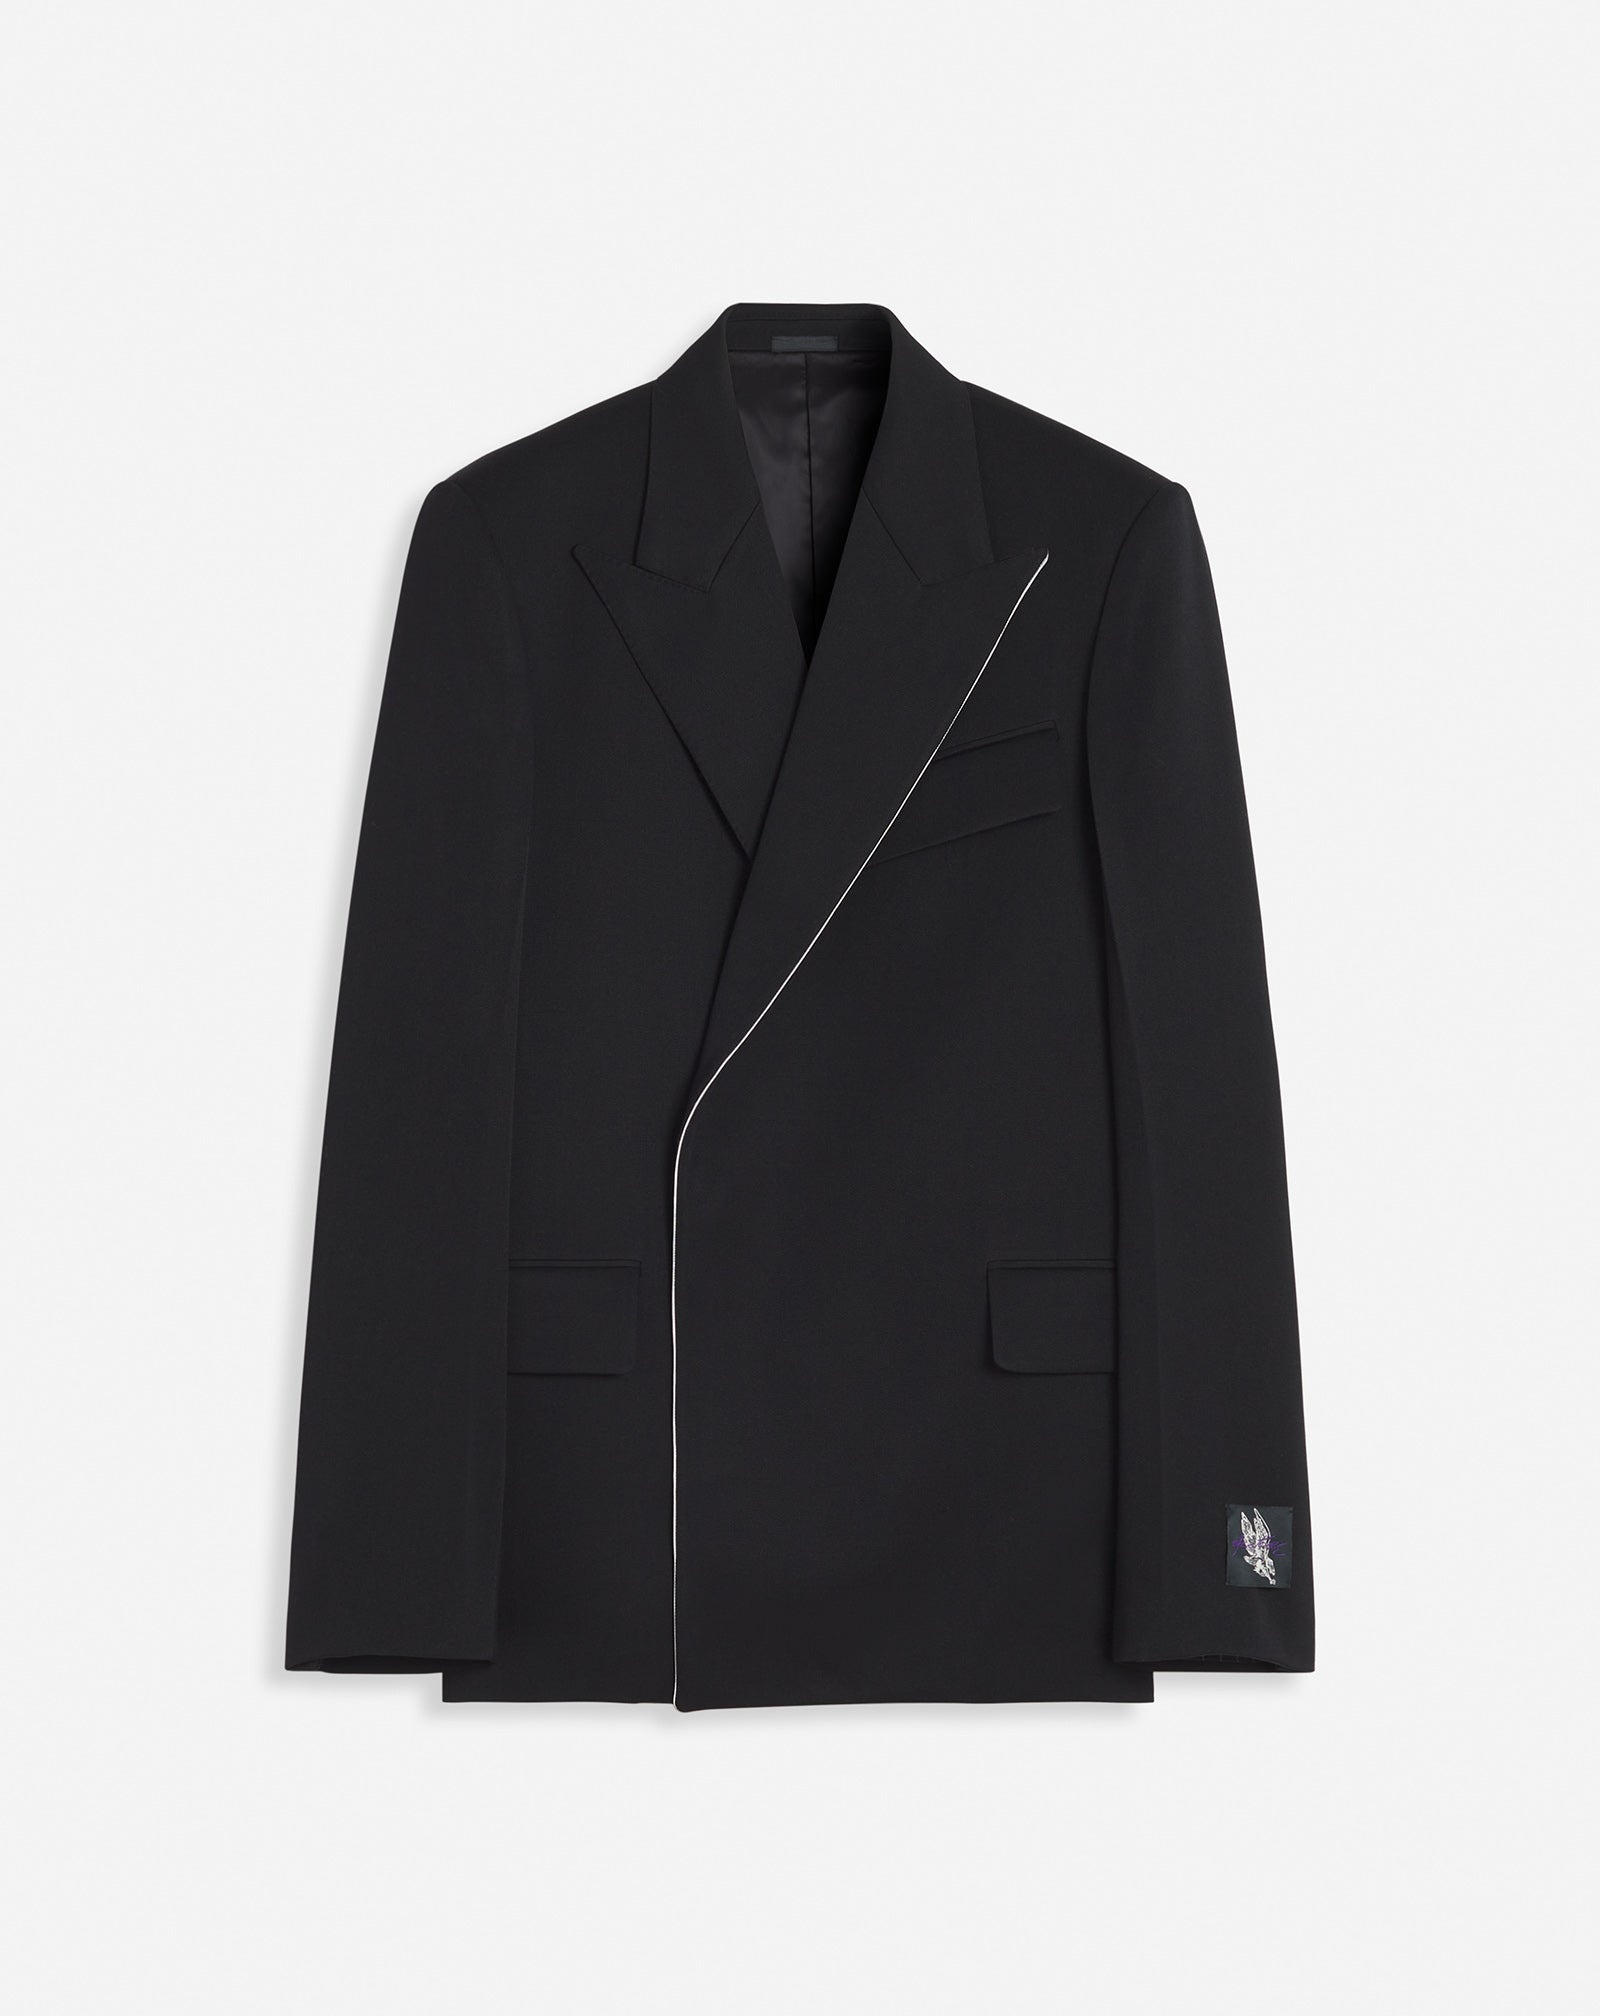 LANVIN X FUTURE UNISEX DOUBLE-BREASTED JACKET - 1